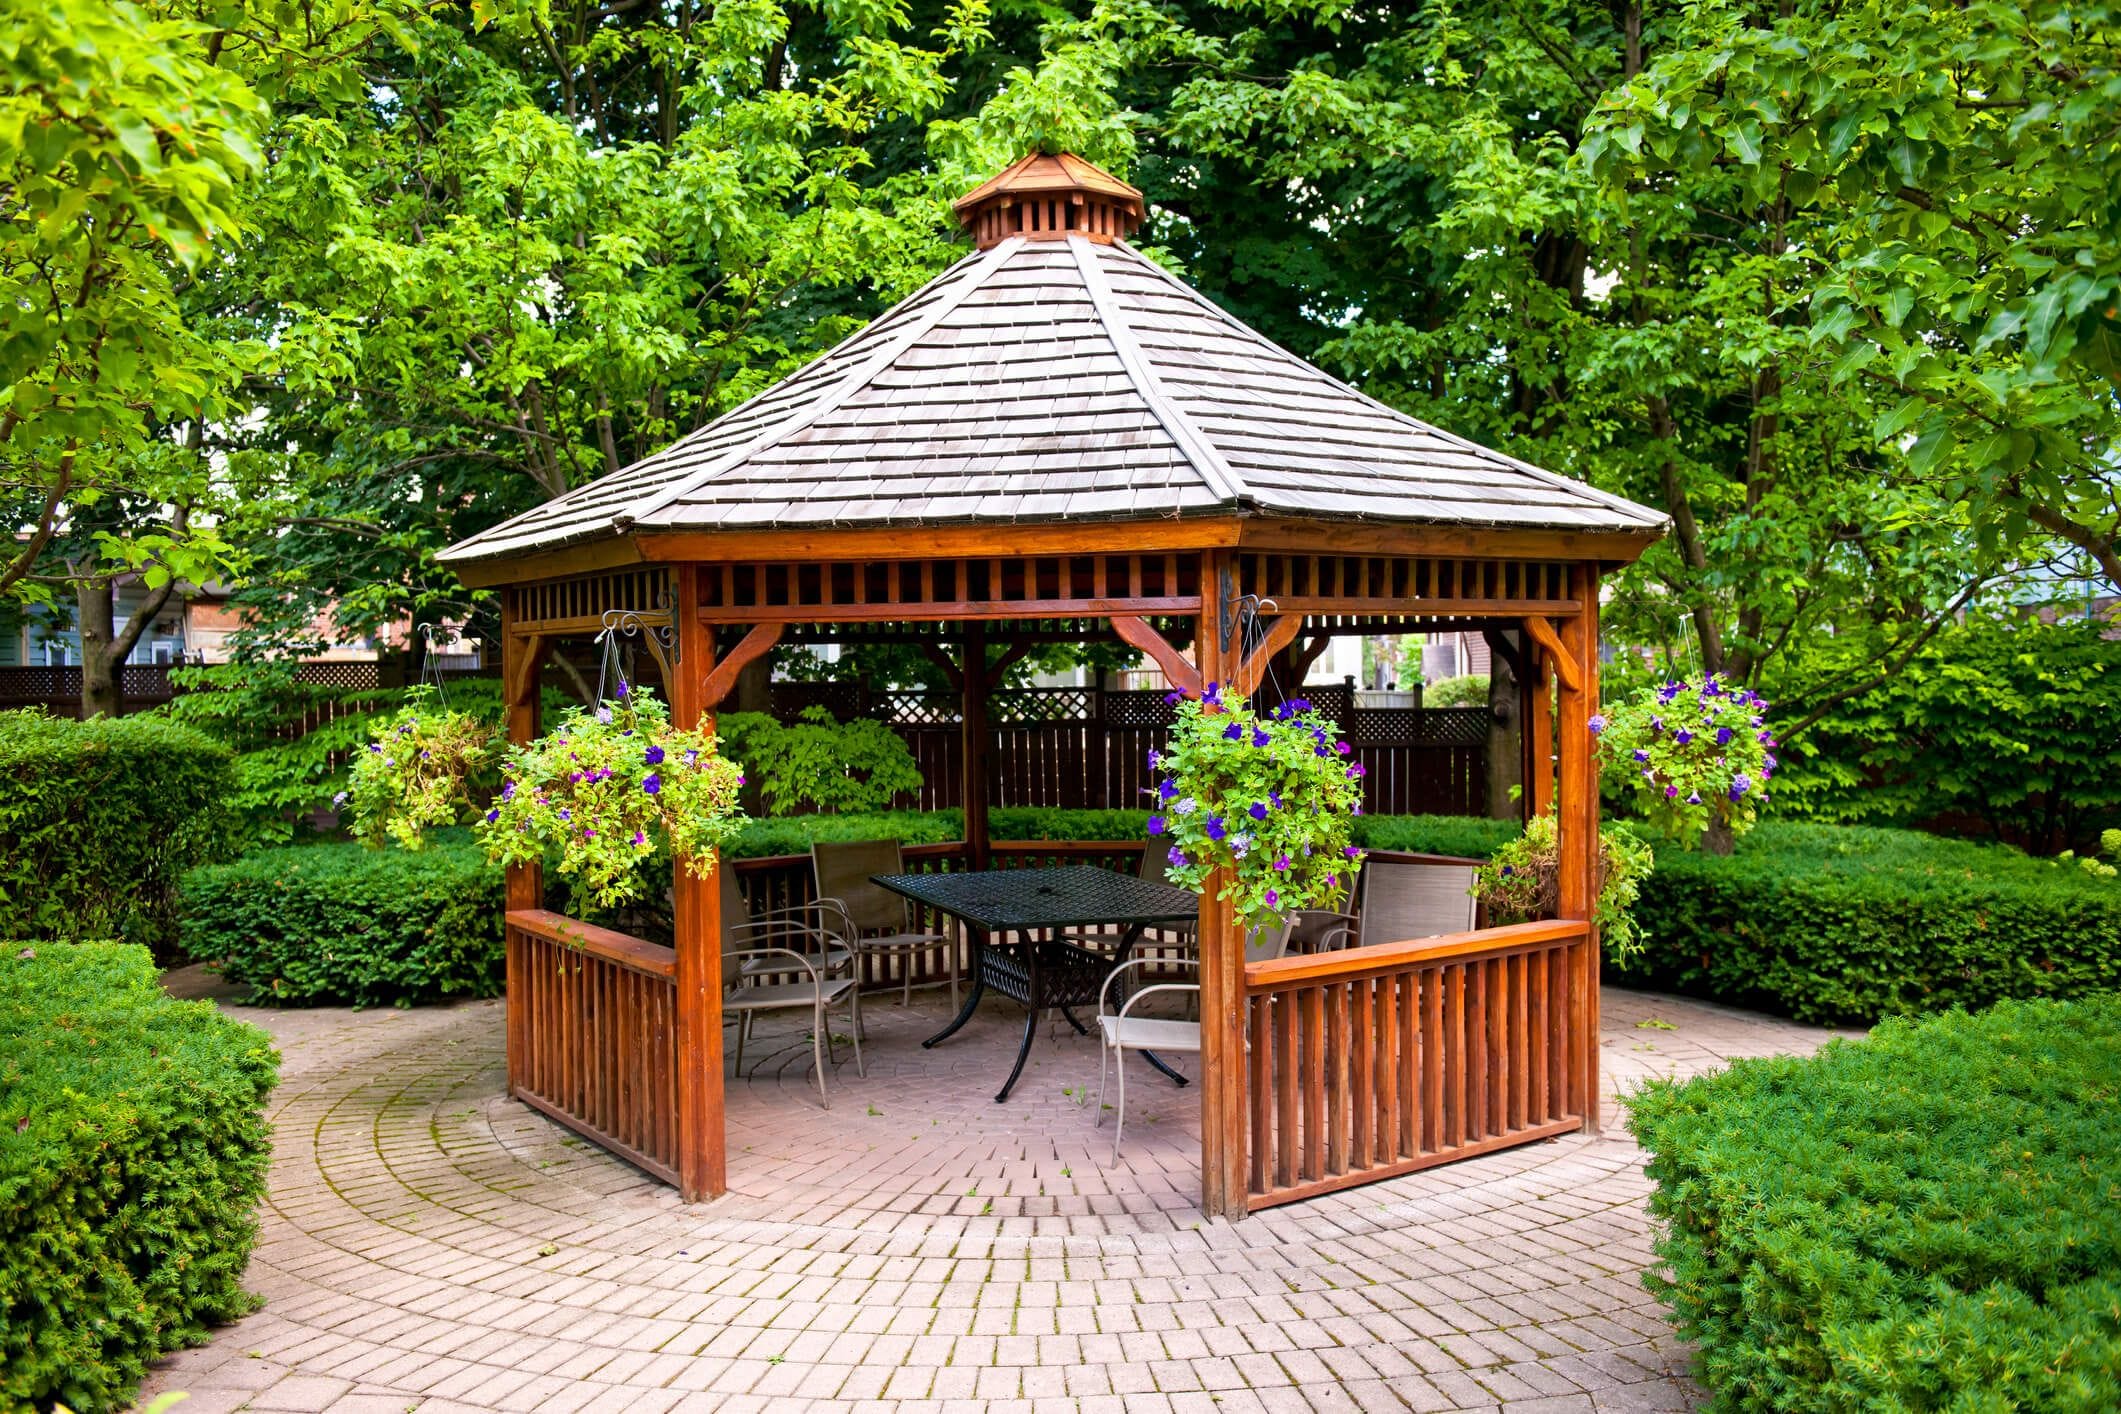 How to Deliver Gazebos to Clients: Challenges for Retailers